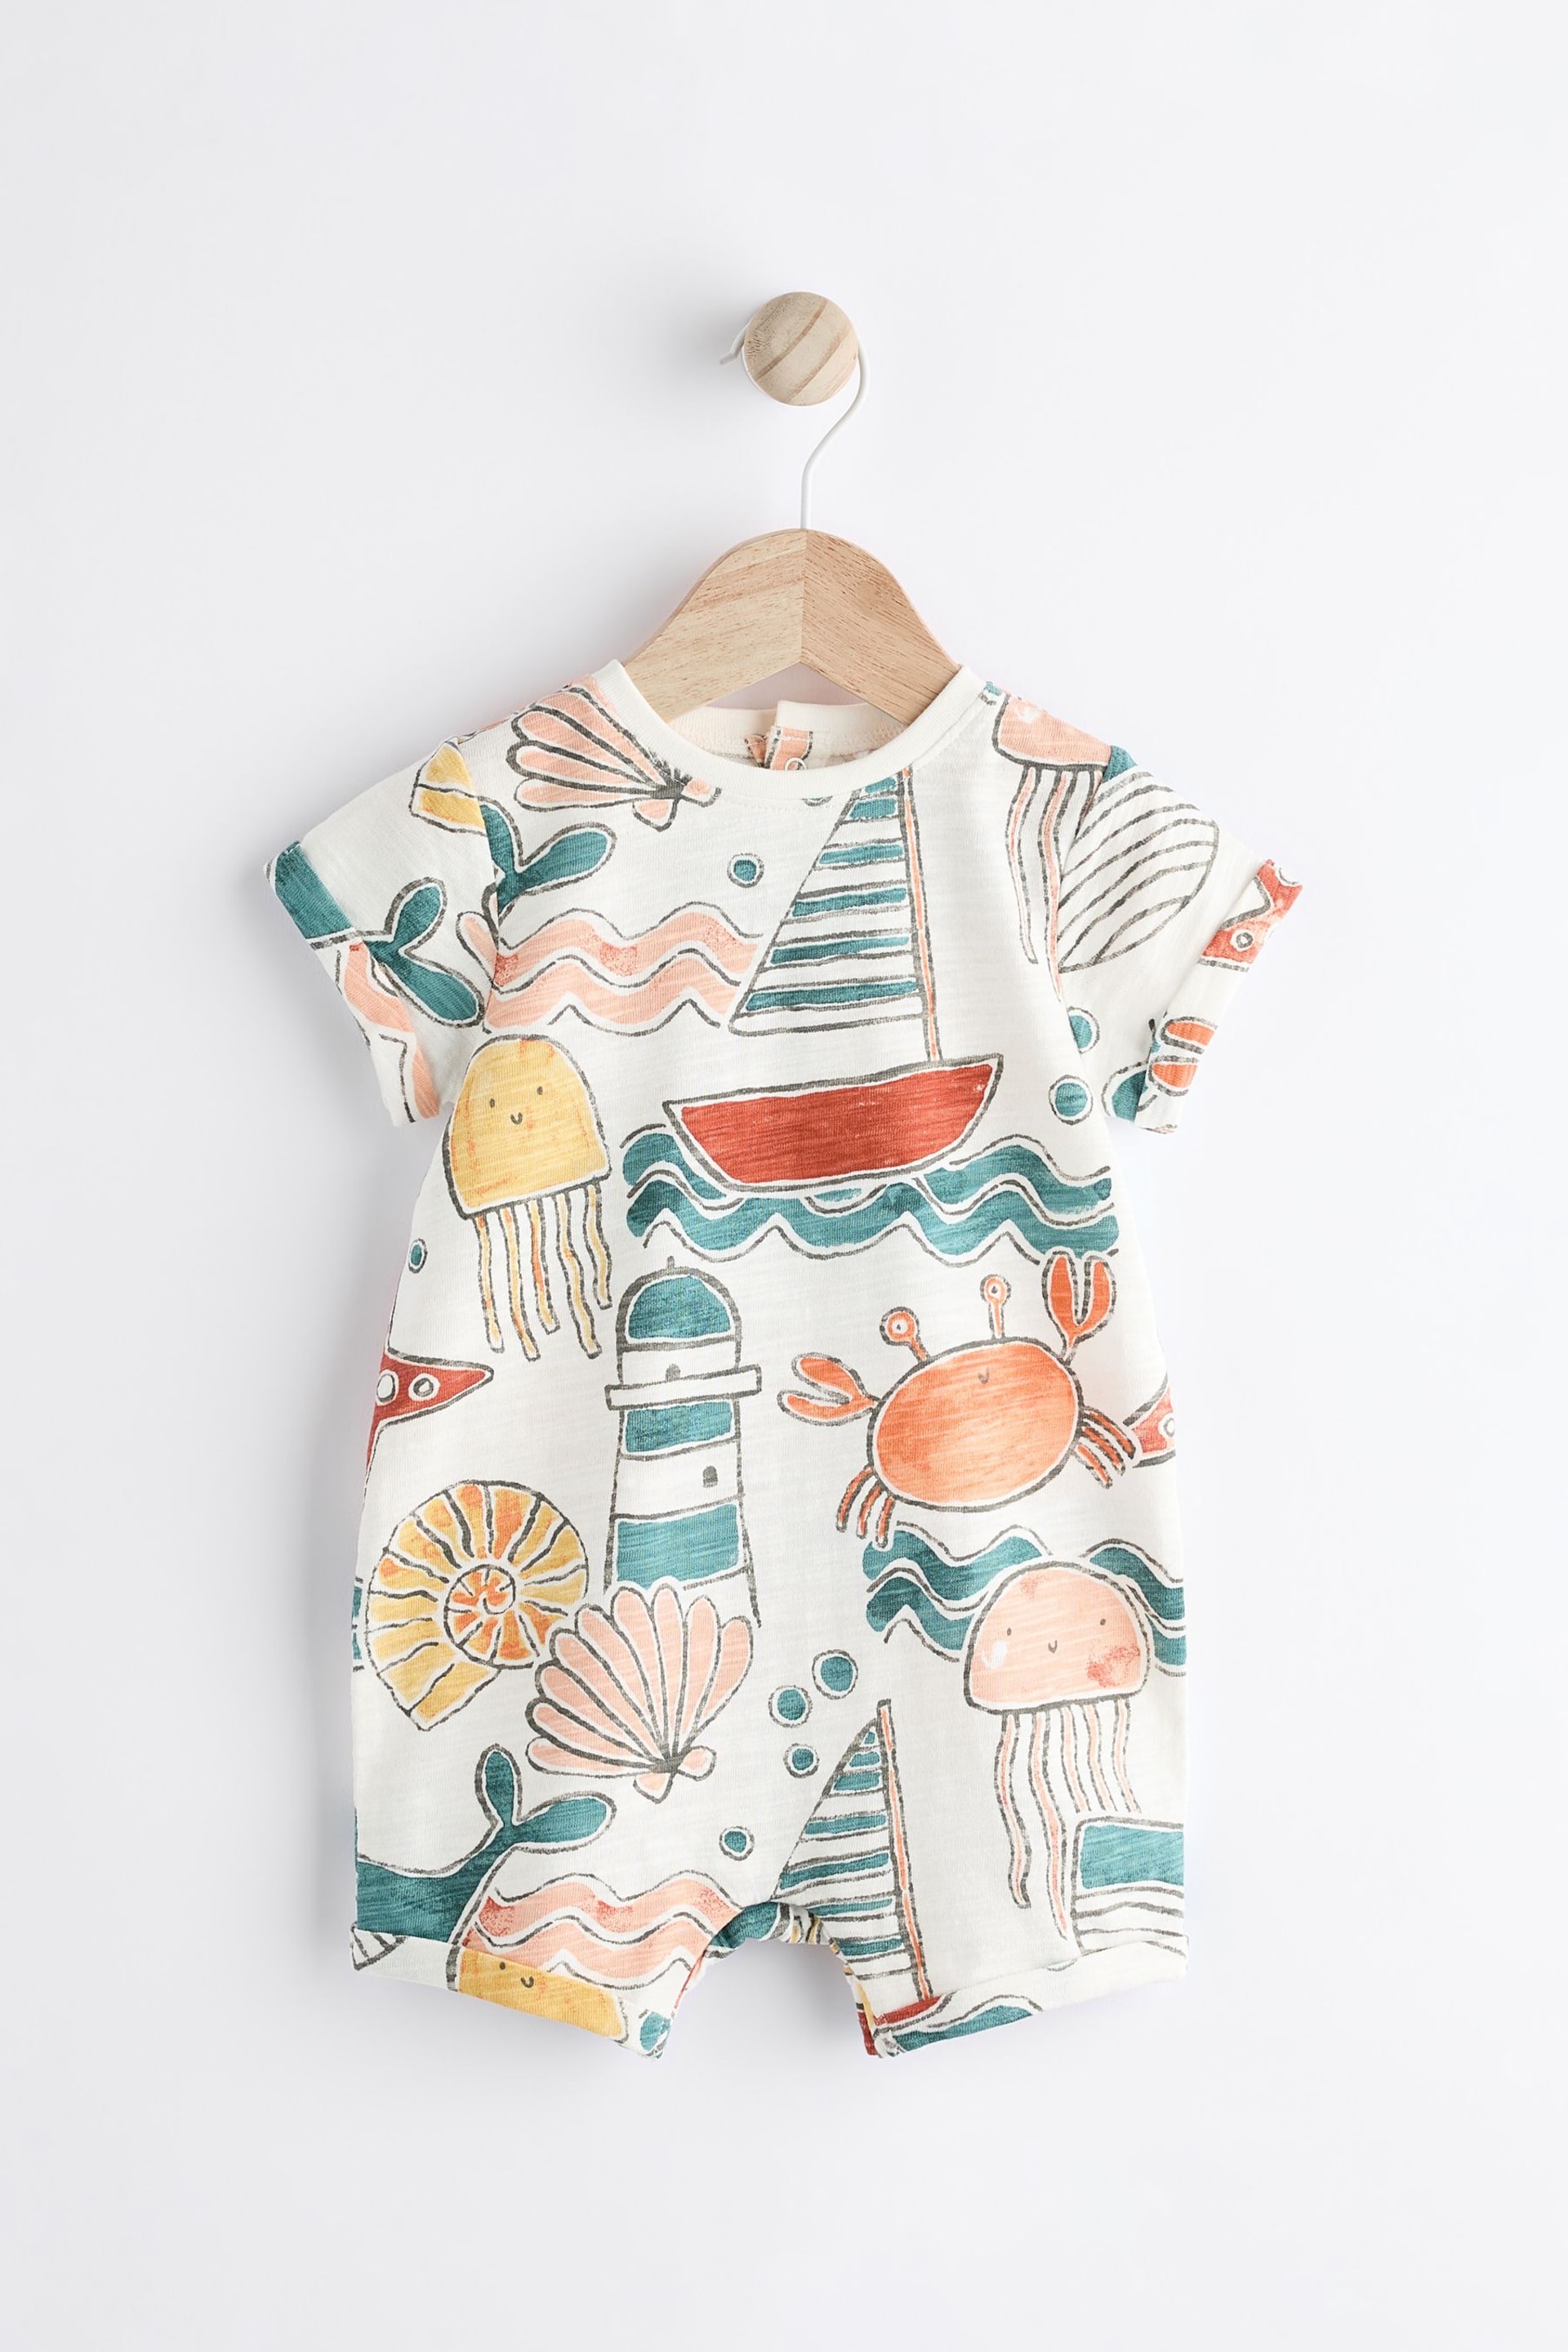 Multi Sea Character Baby Jersey Romper - Image 6 of 12